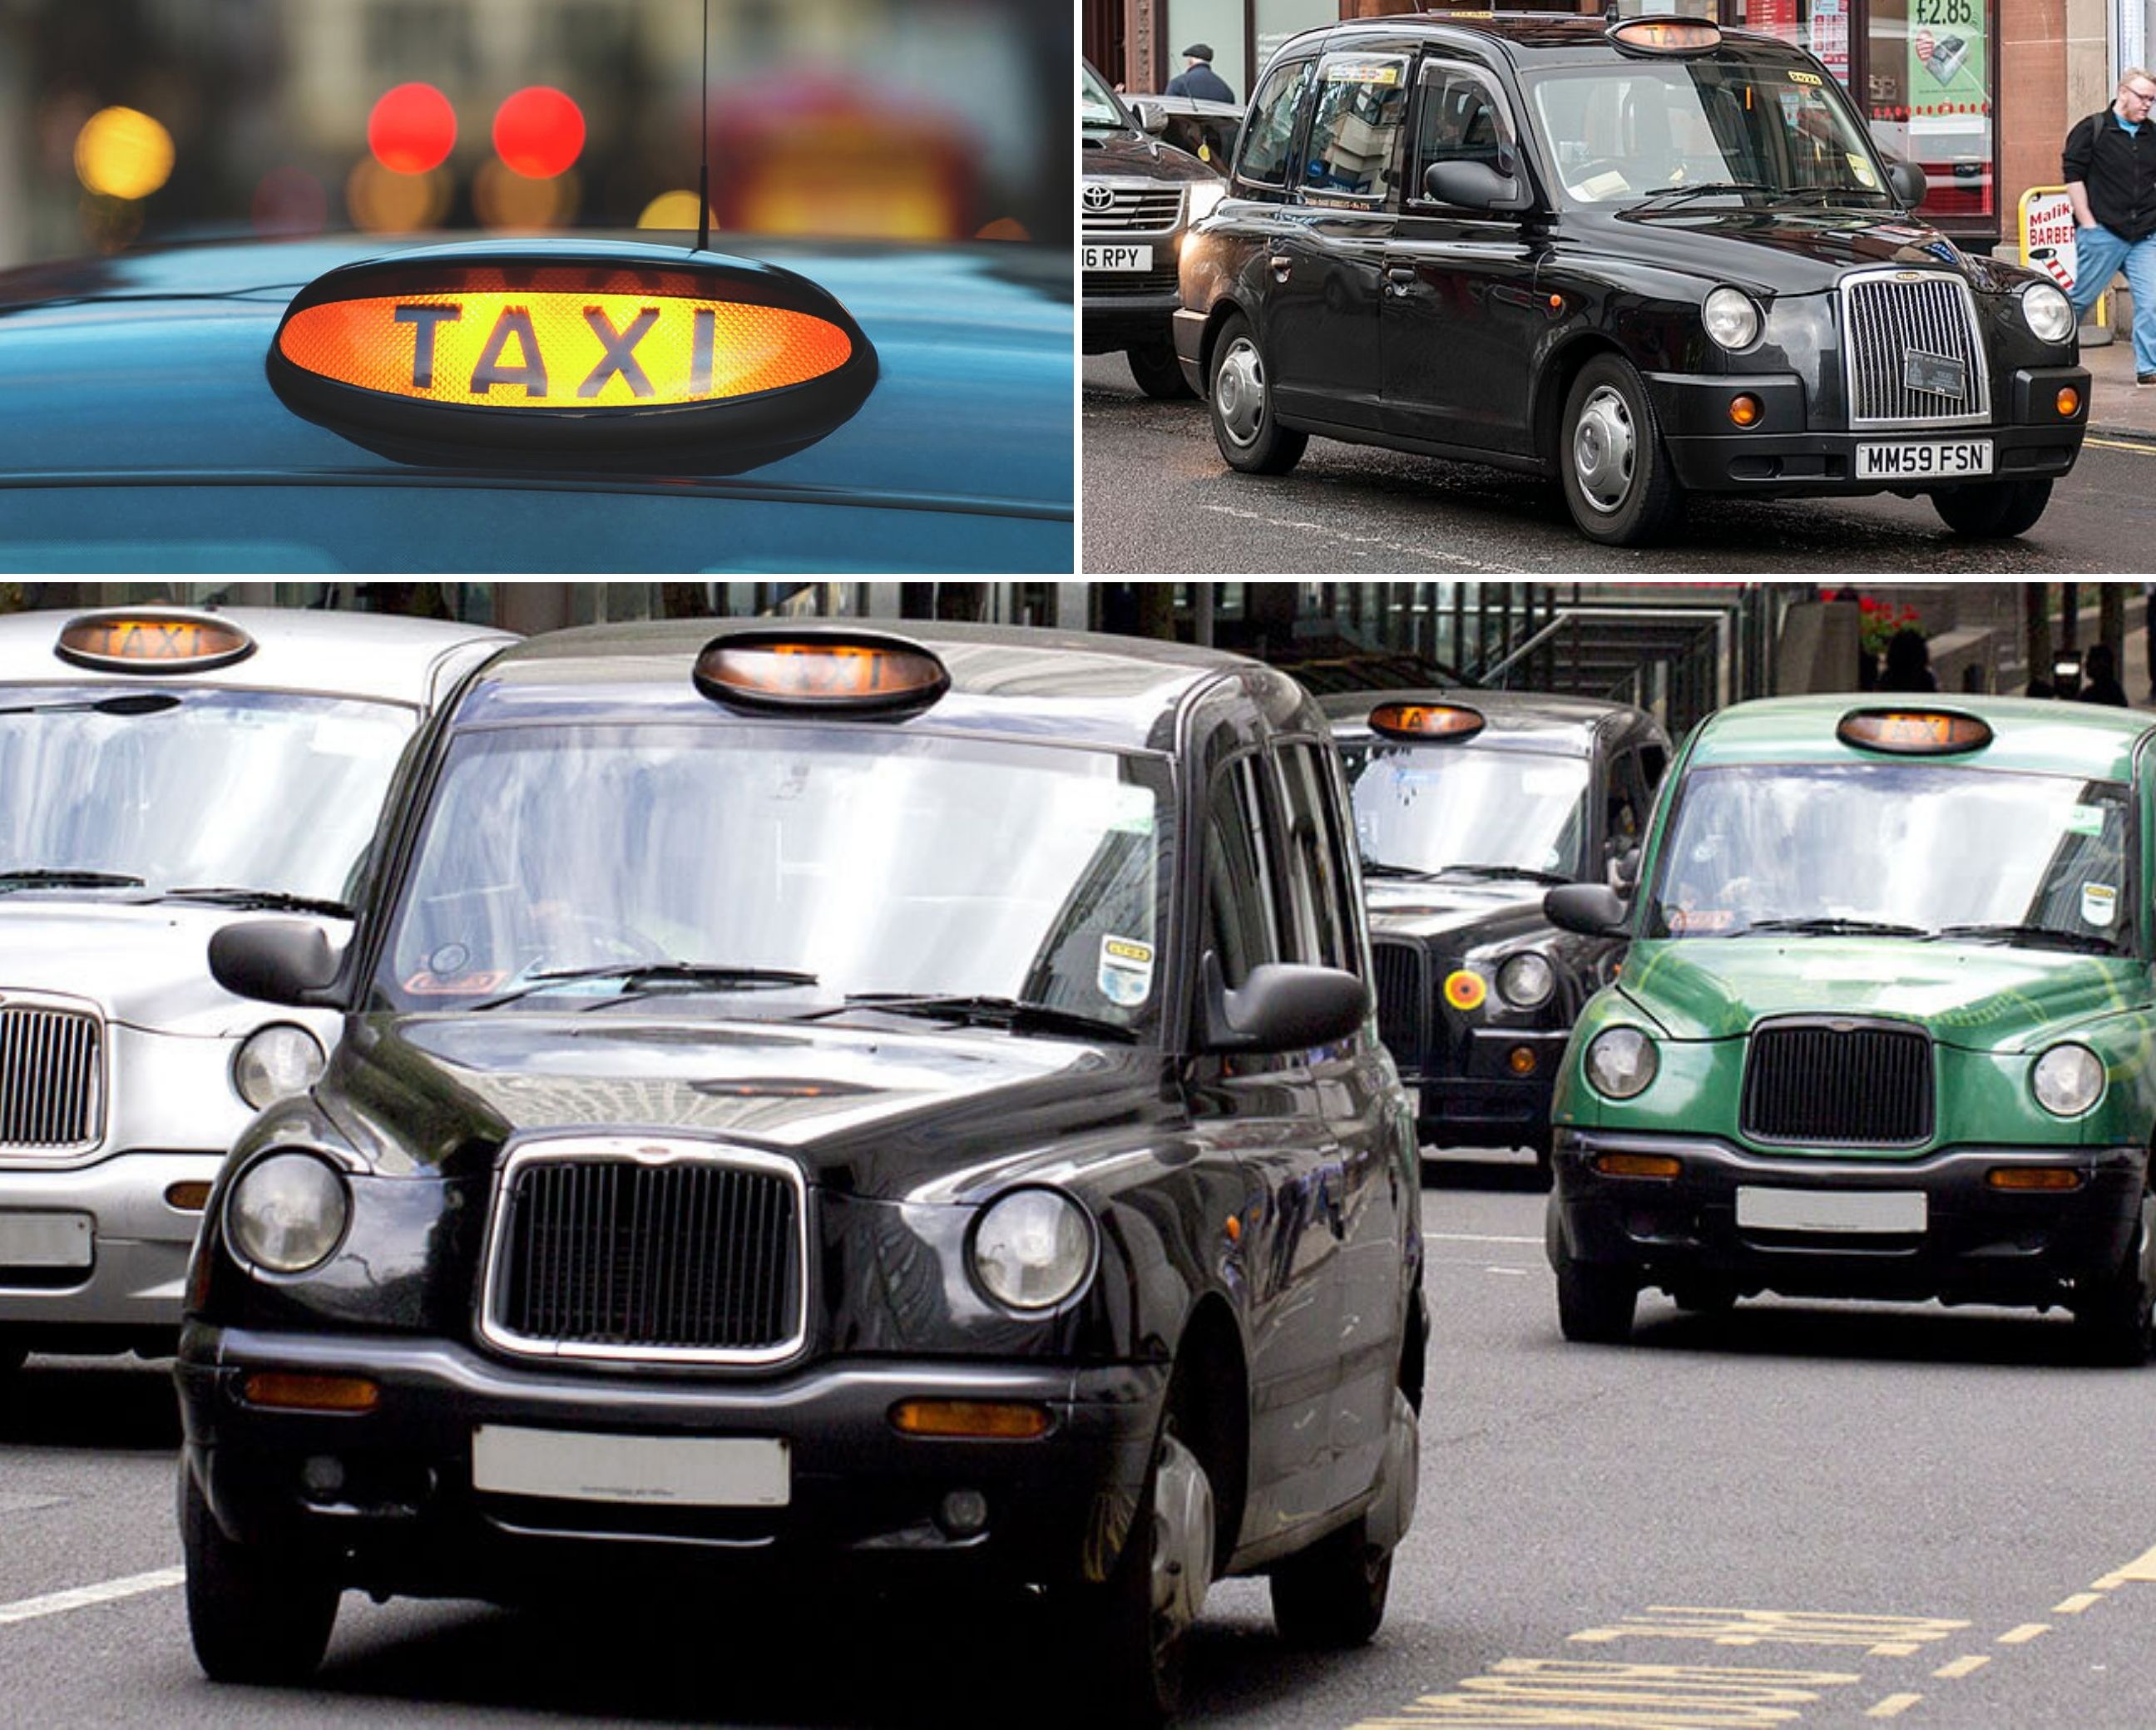 Differences between Classic Taxis and Minicabs